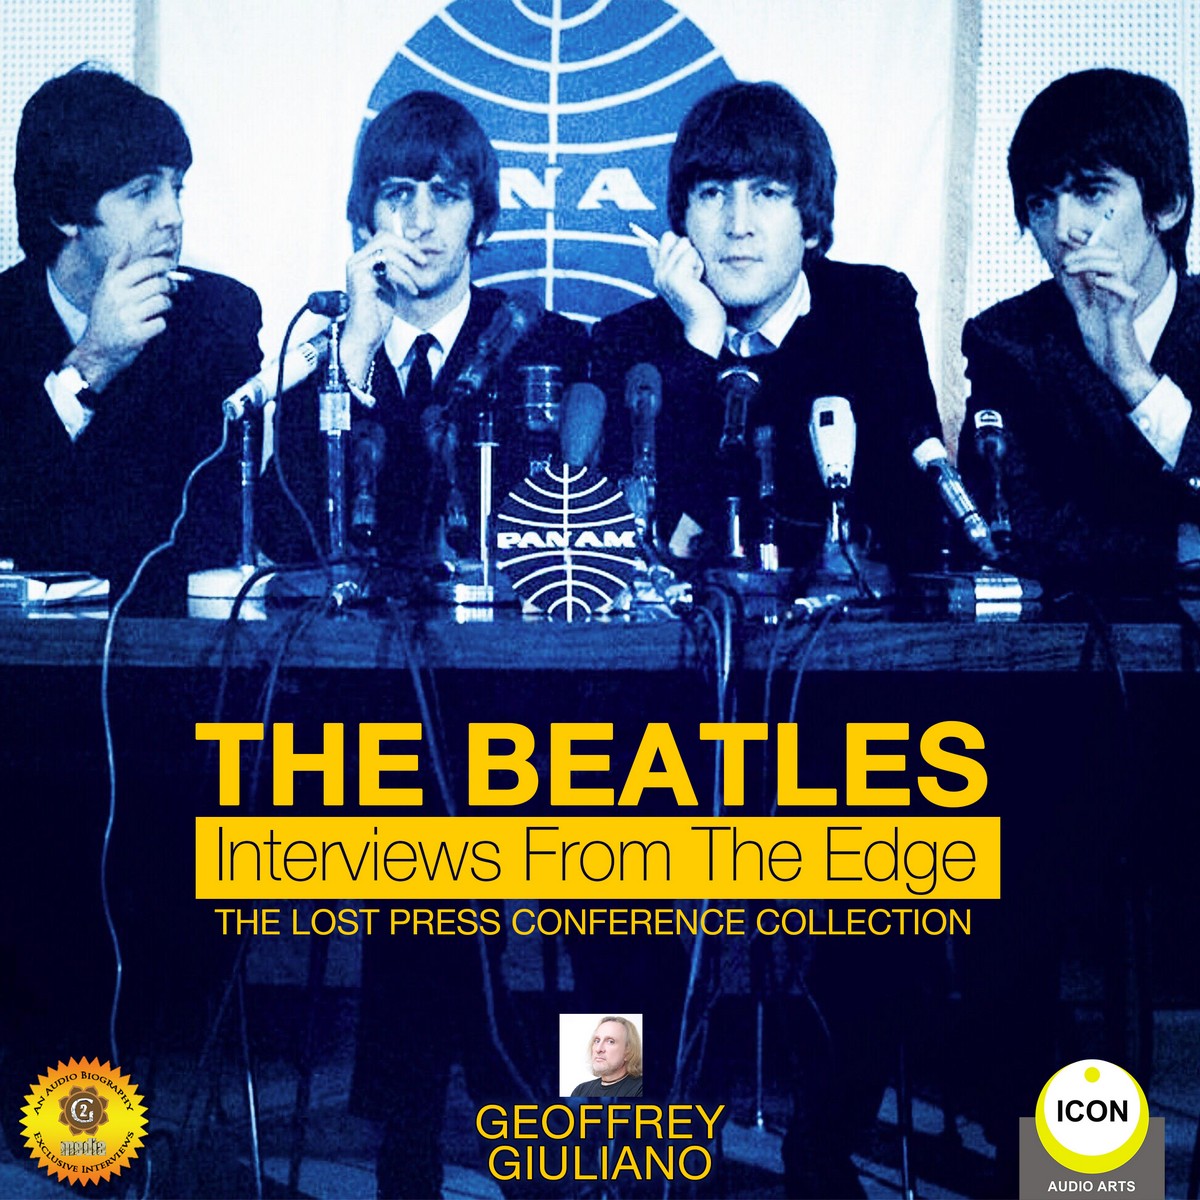 The Beatles: Interviews from the Edge – The Lost Press Conference Collection